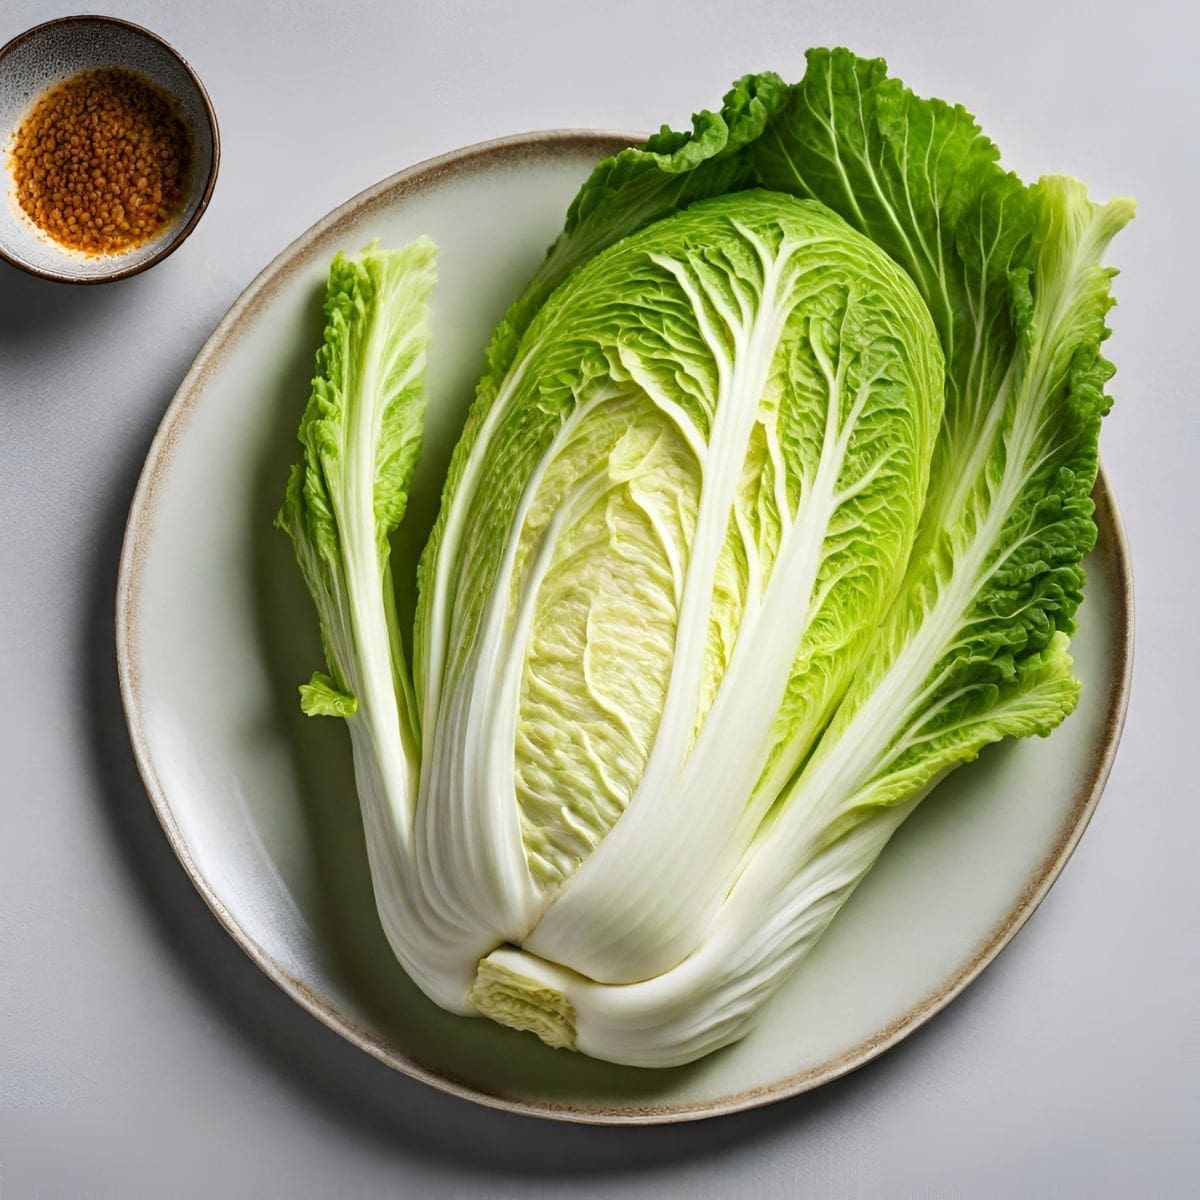 What Is Napa Cabbage? And Is It The Same As Chinese Cabbage?